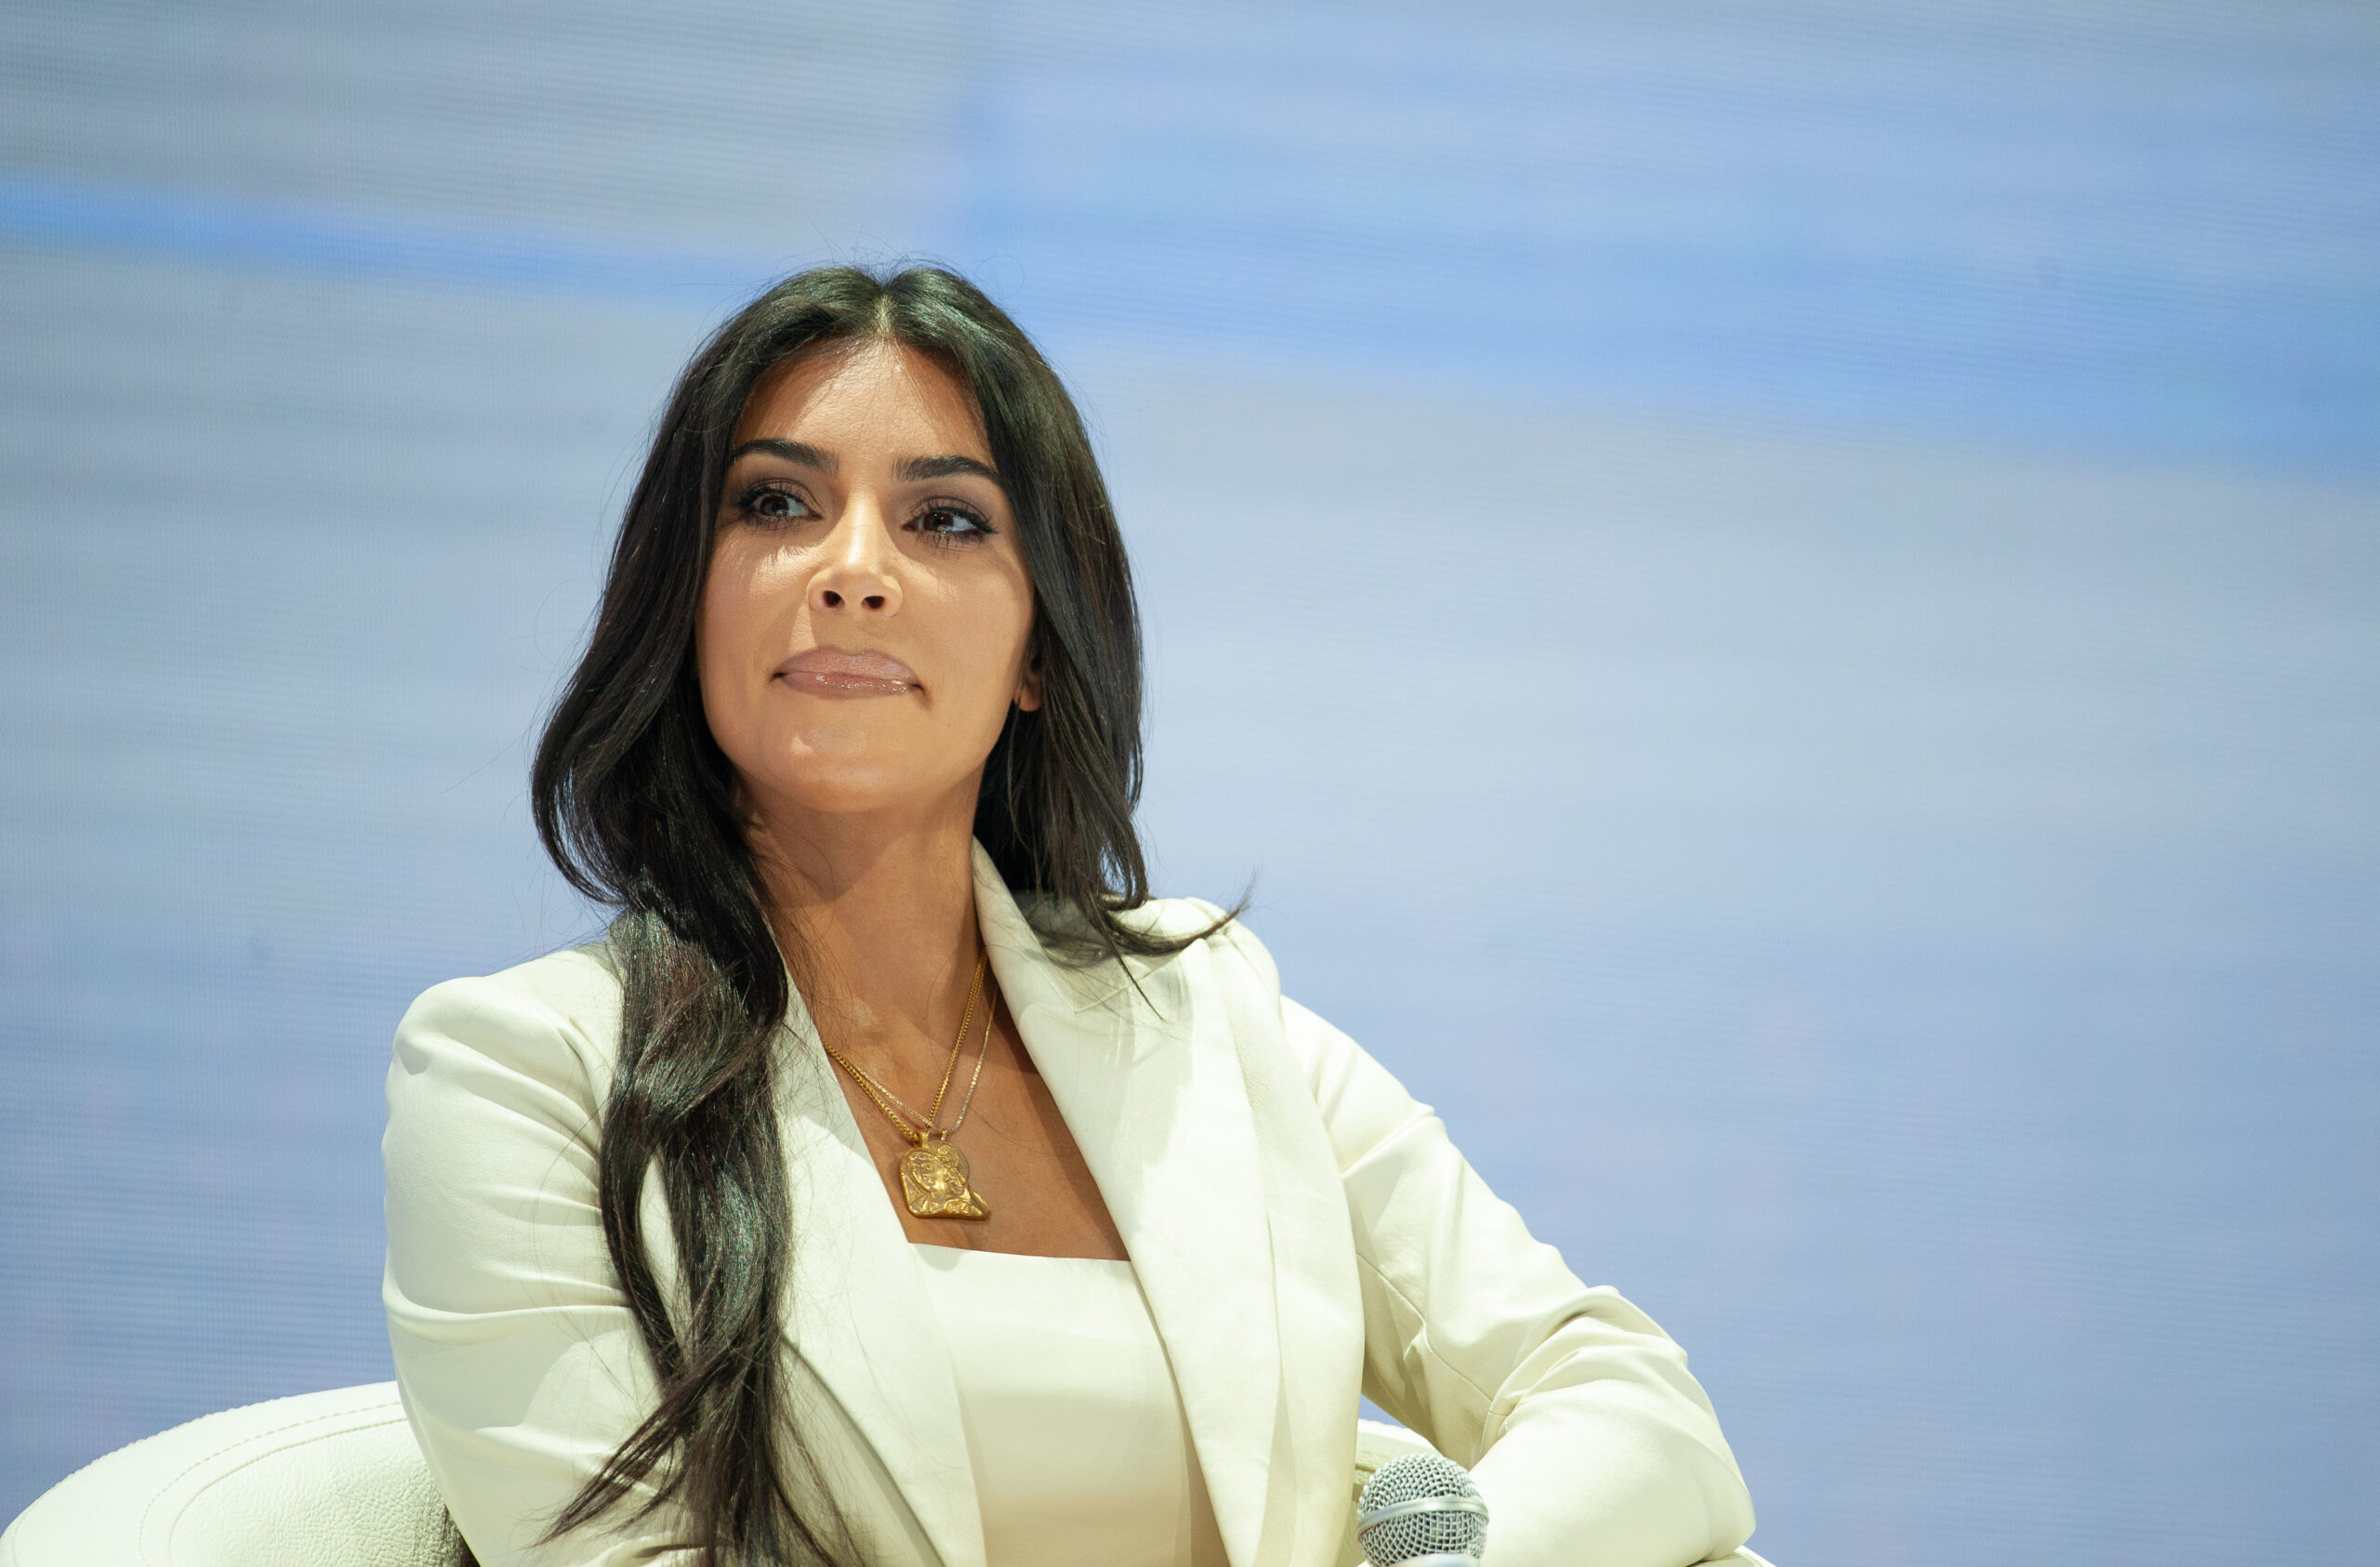 Kardashian and Other Celebrity Crypto Endorsers Beat Investor Suit